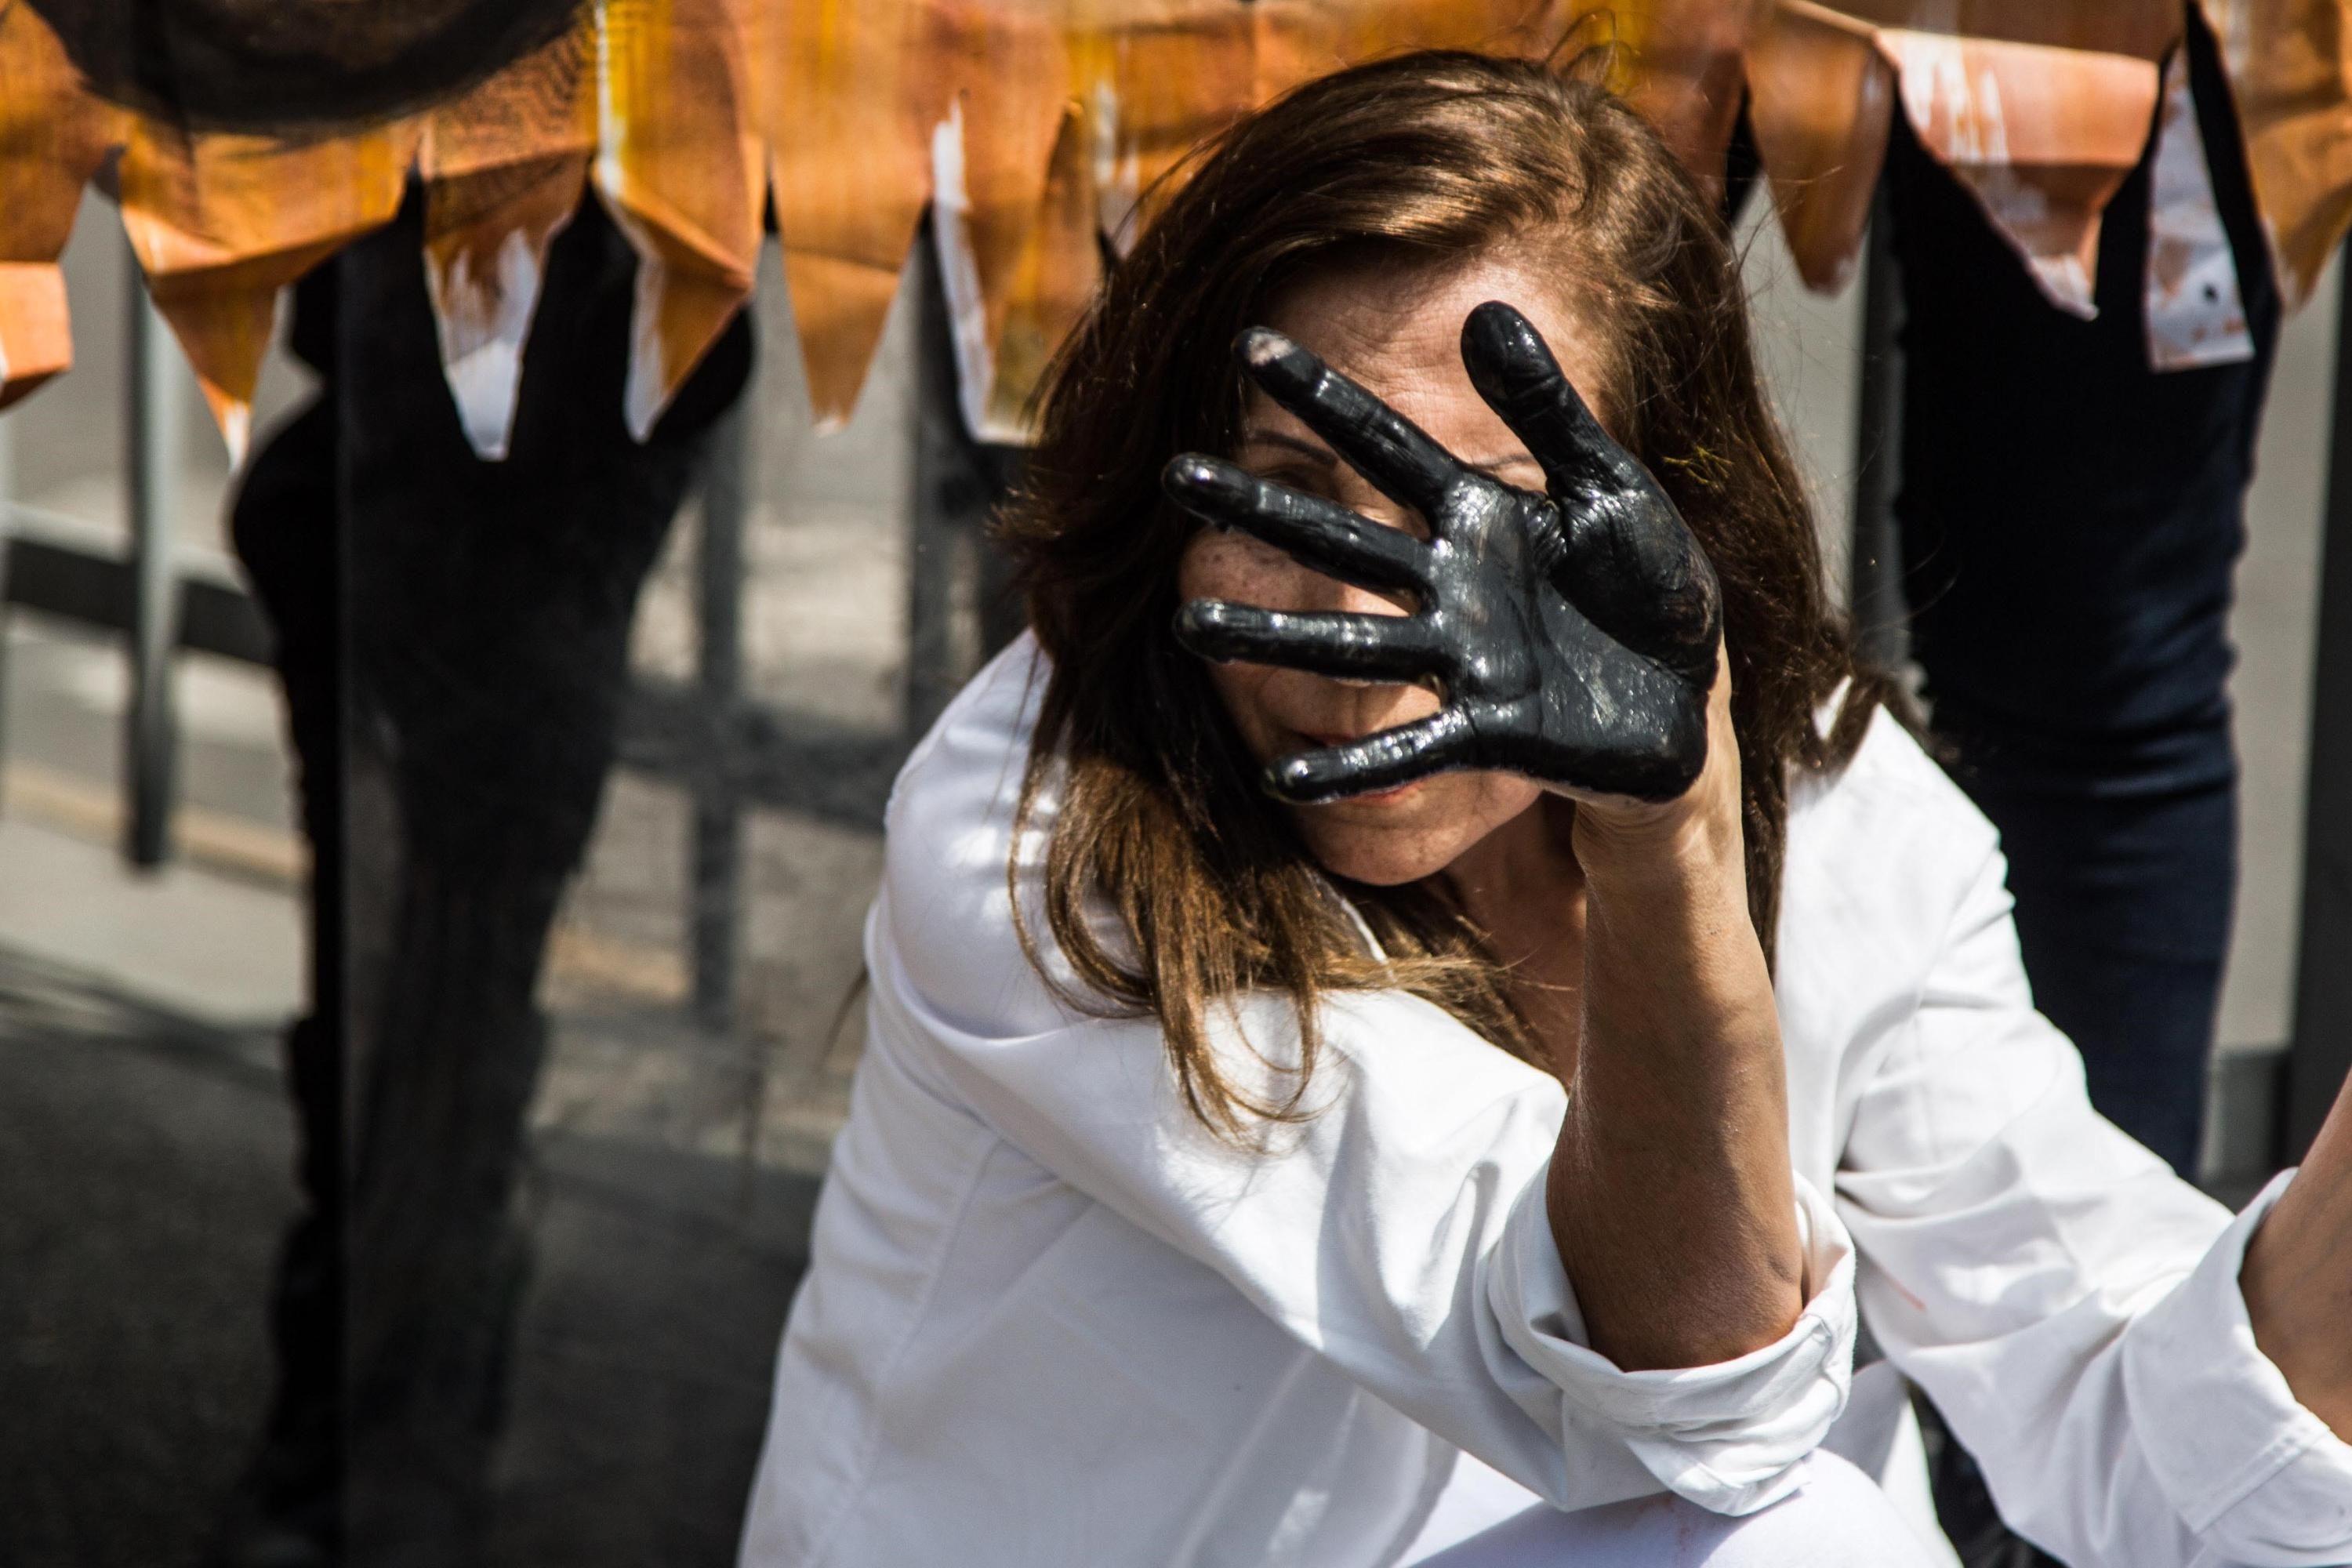 A woman displays oil on her hands at a protest